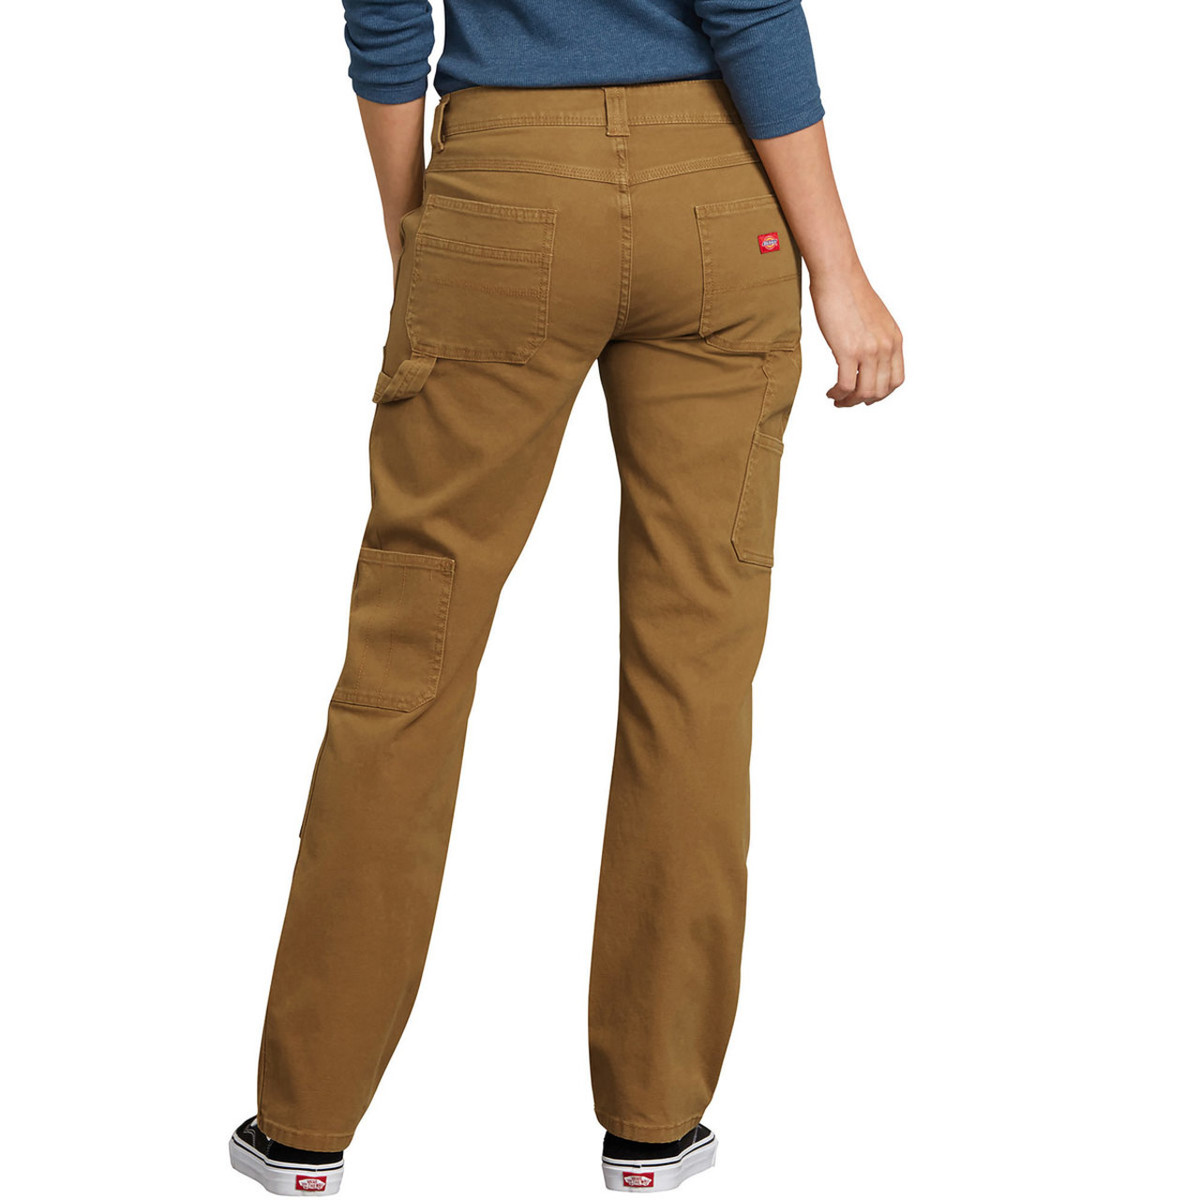 Men's Dickies Relaxed Fit Sanded Duck Canvas Carpenter Pants